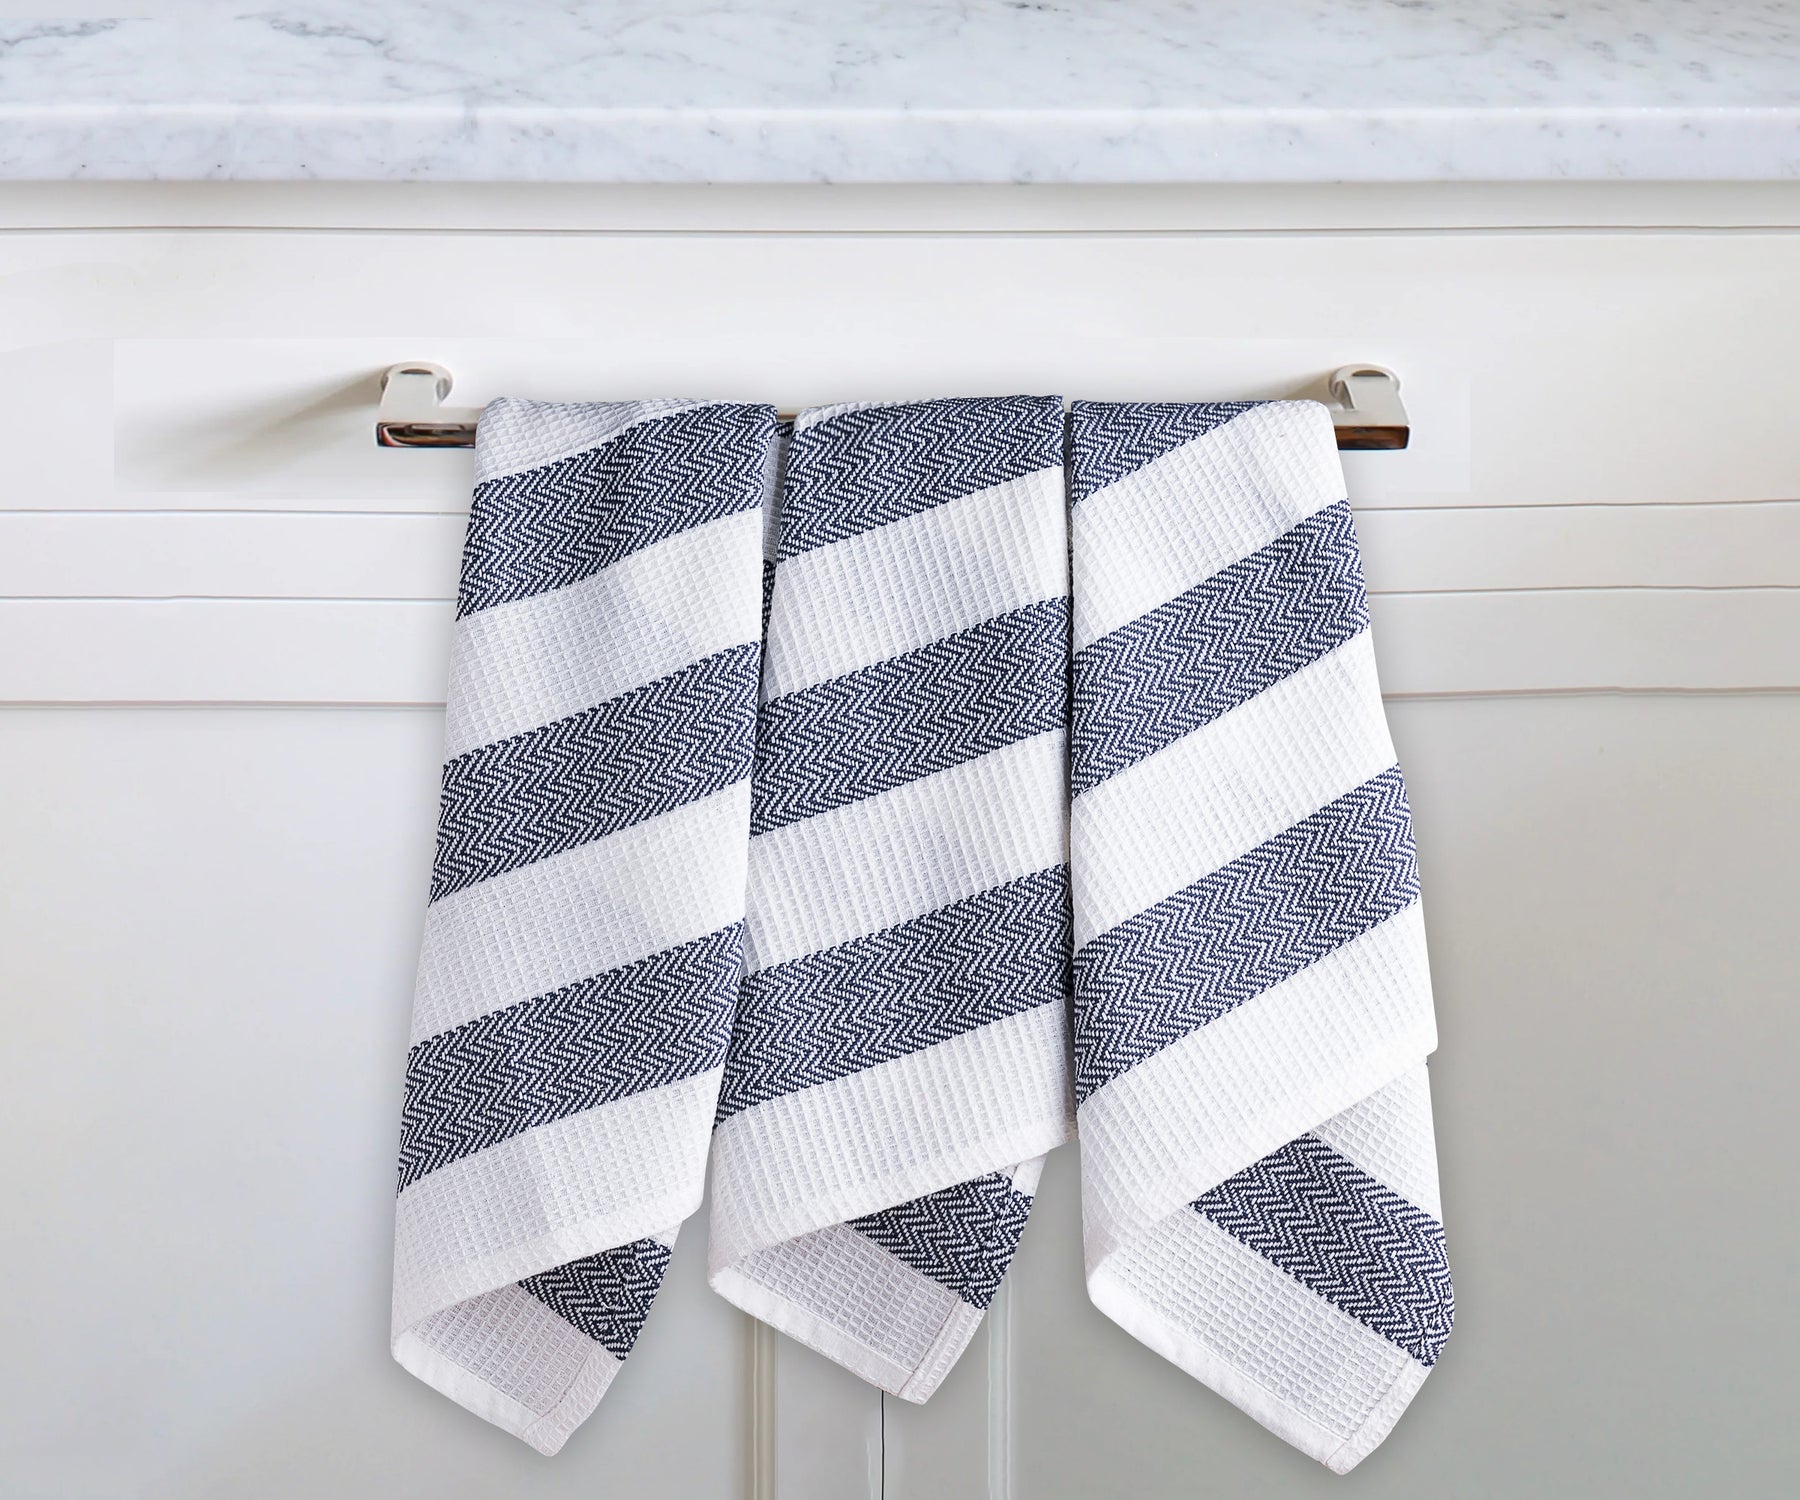 Quick-drying dish towel, ideal for efficiently drying dishes and glassware.